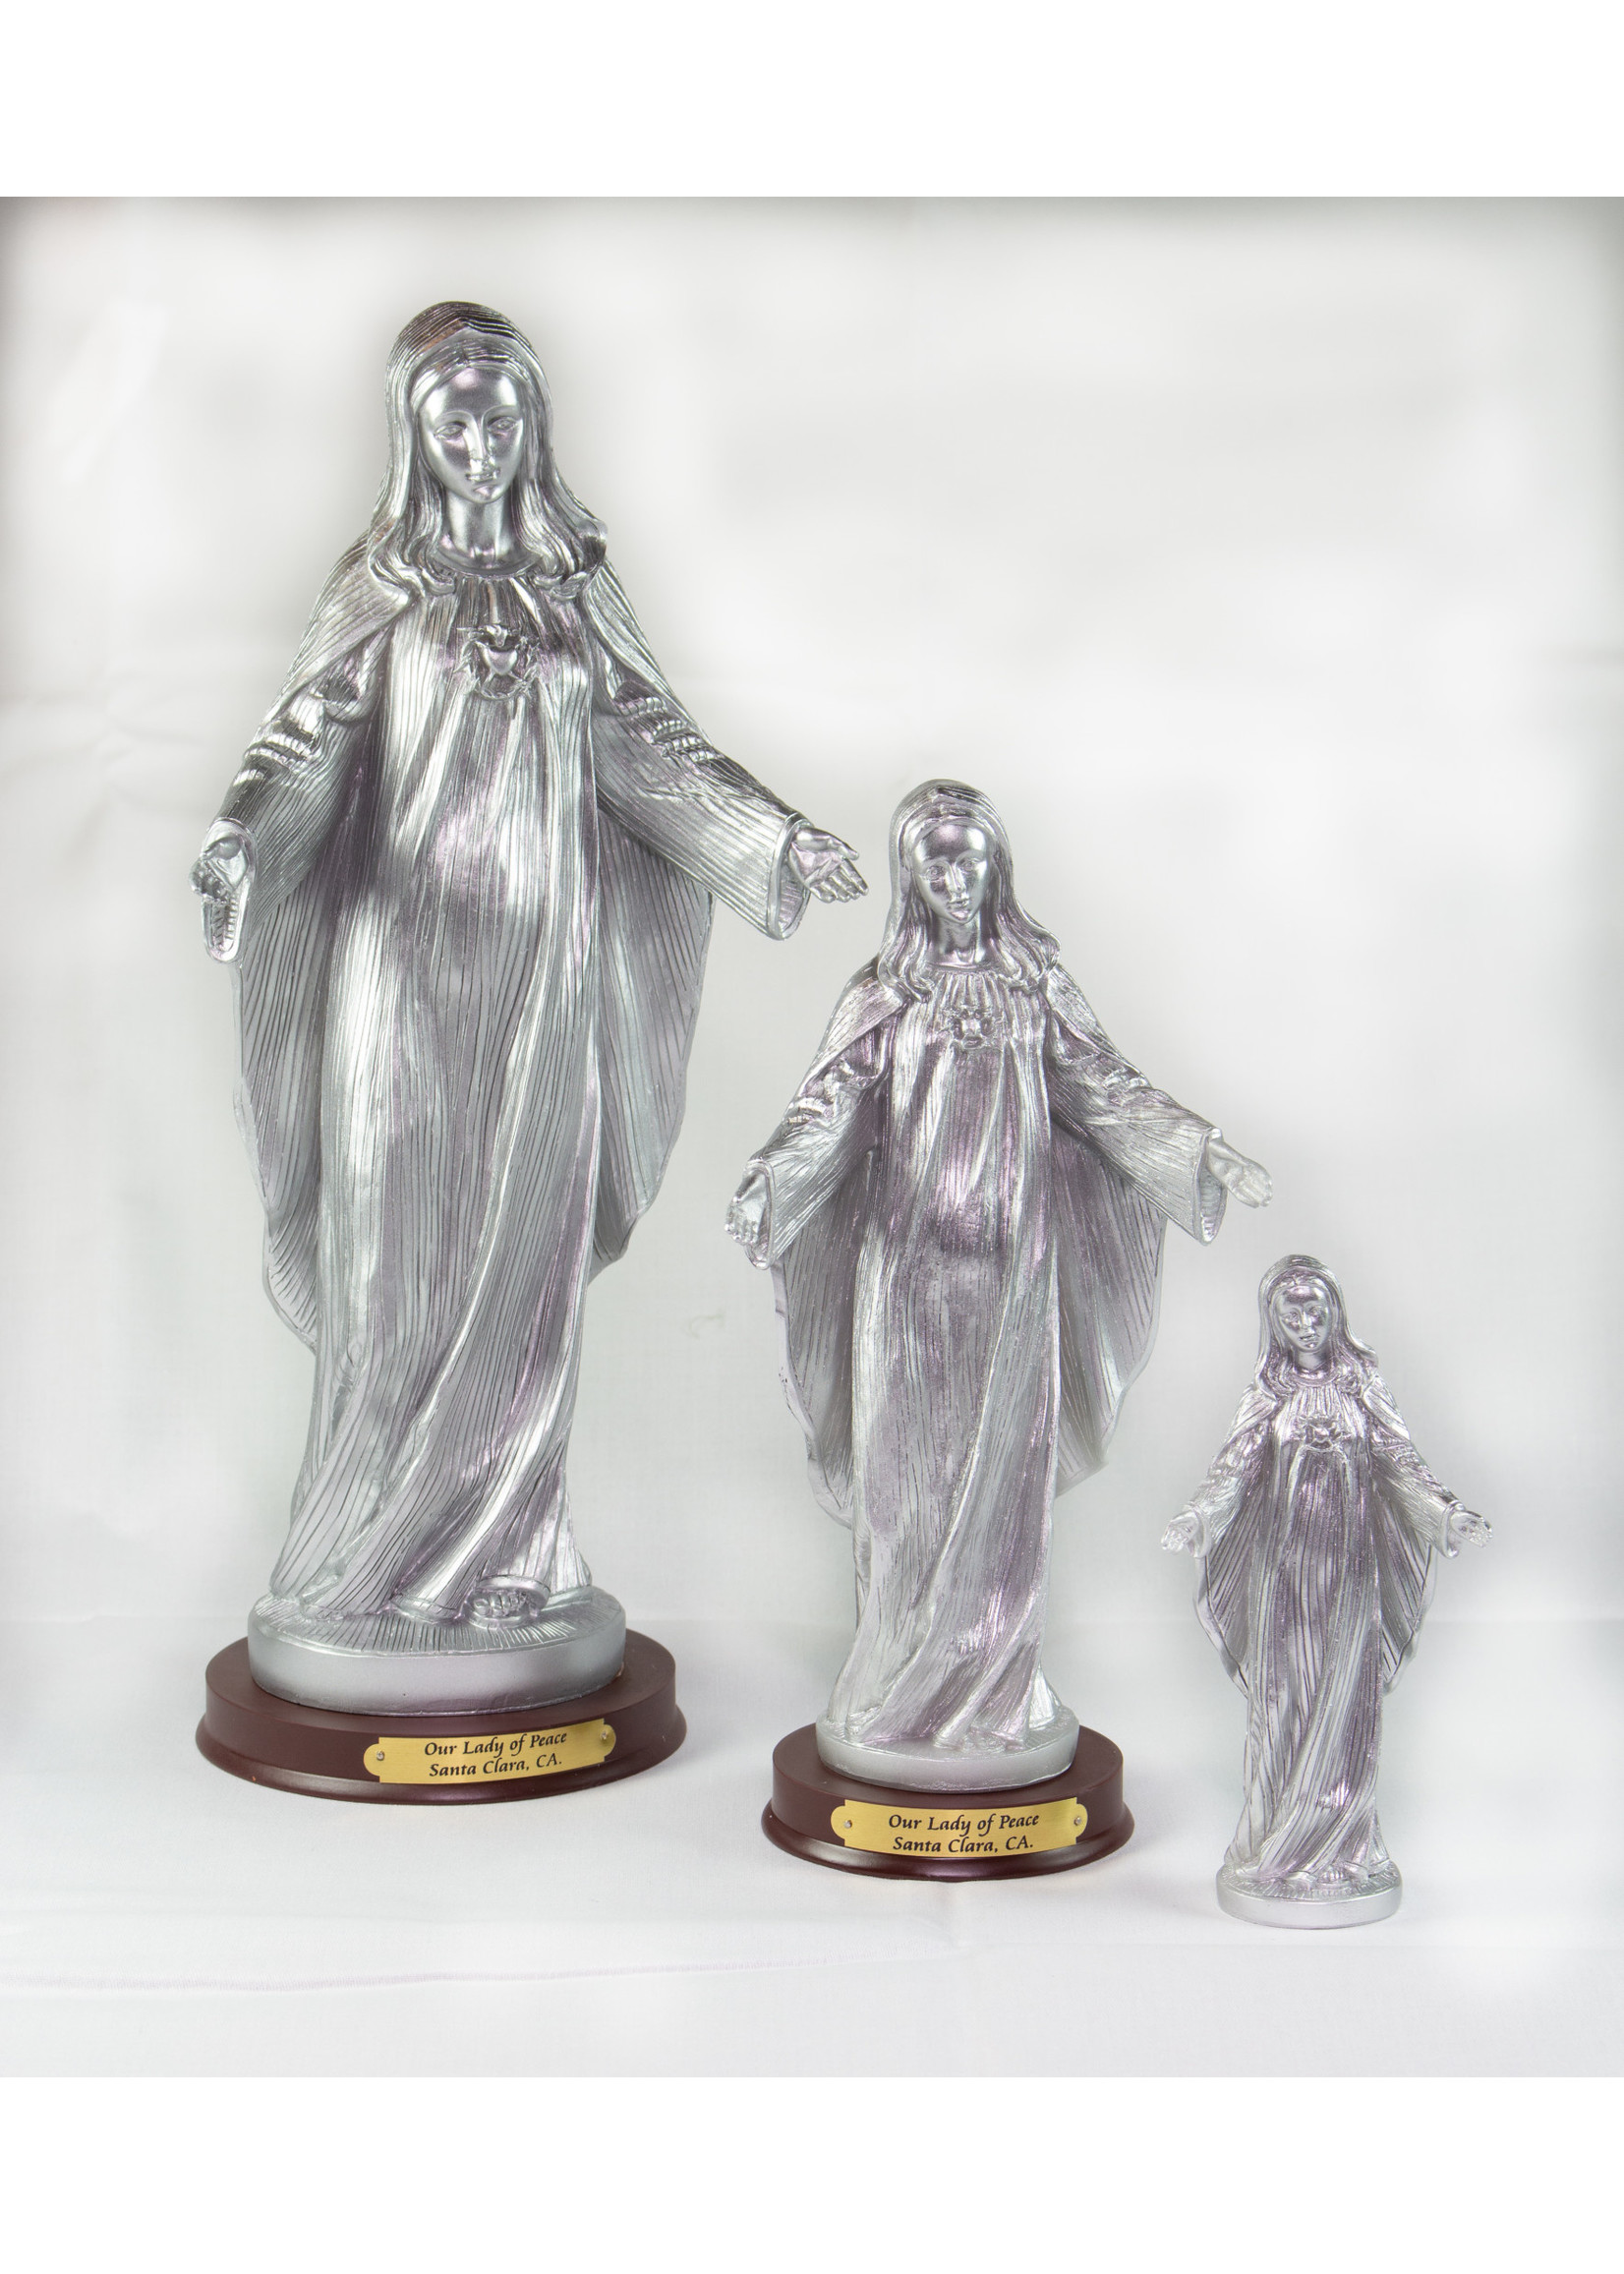 Our Lady of Peace Shrine 8" Statue